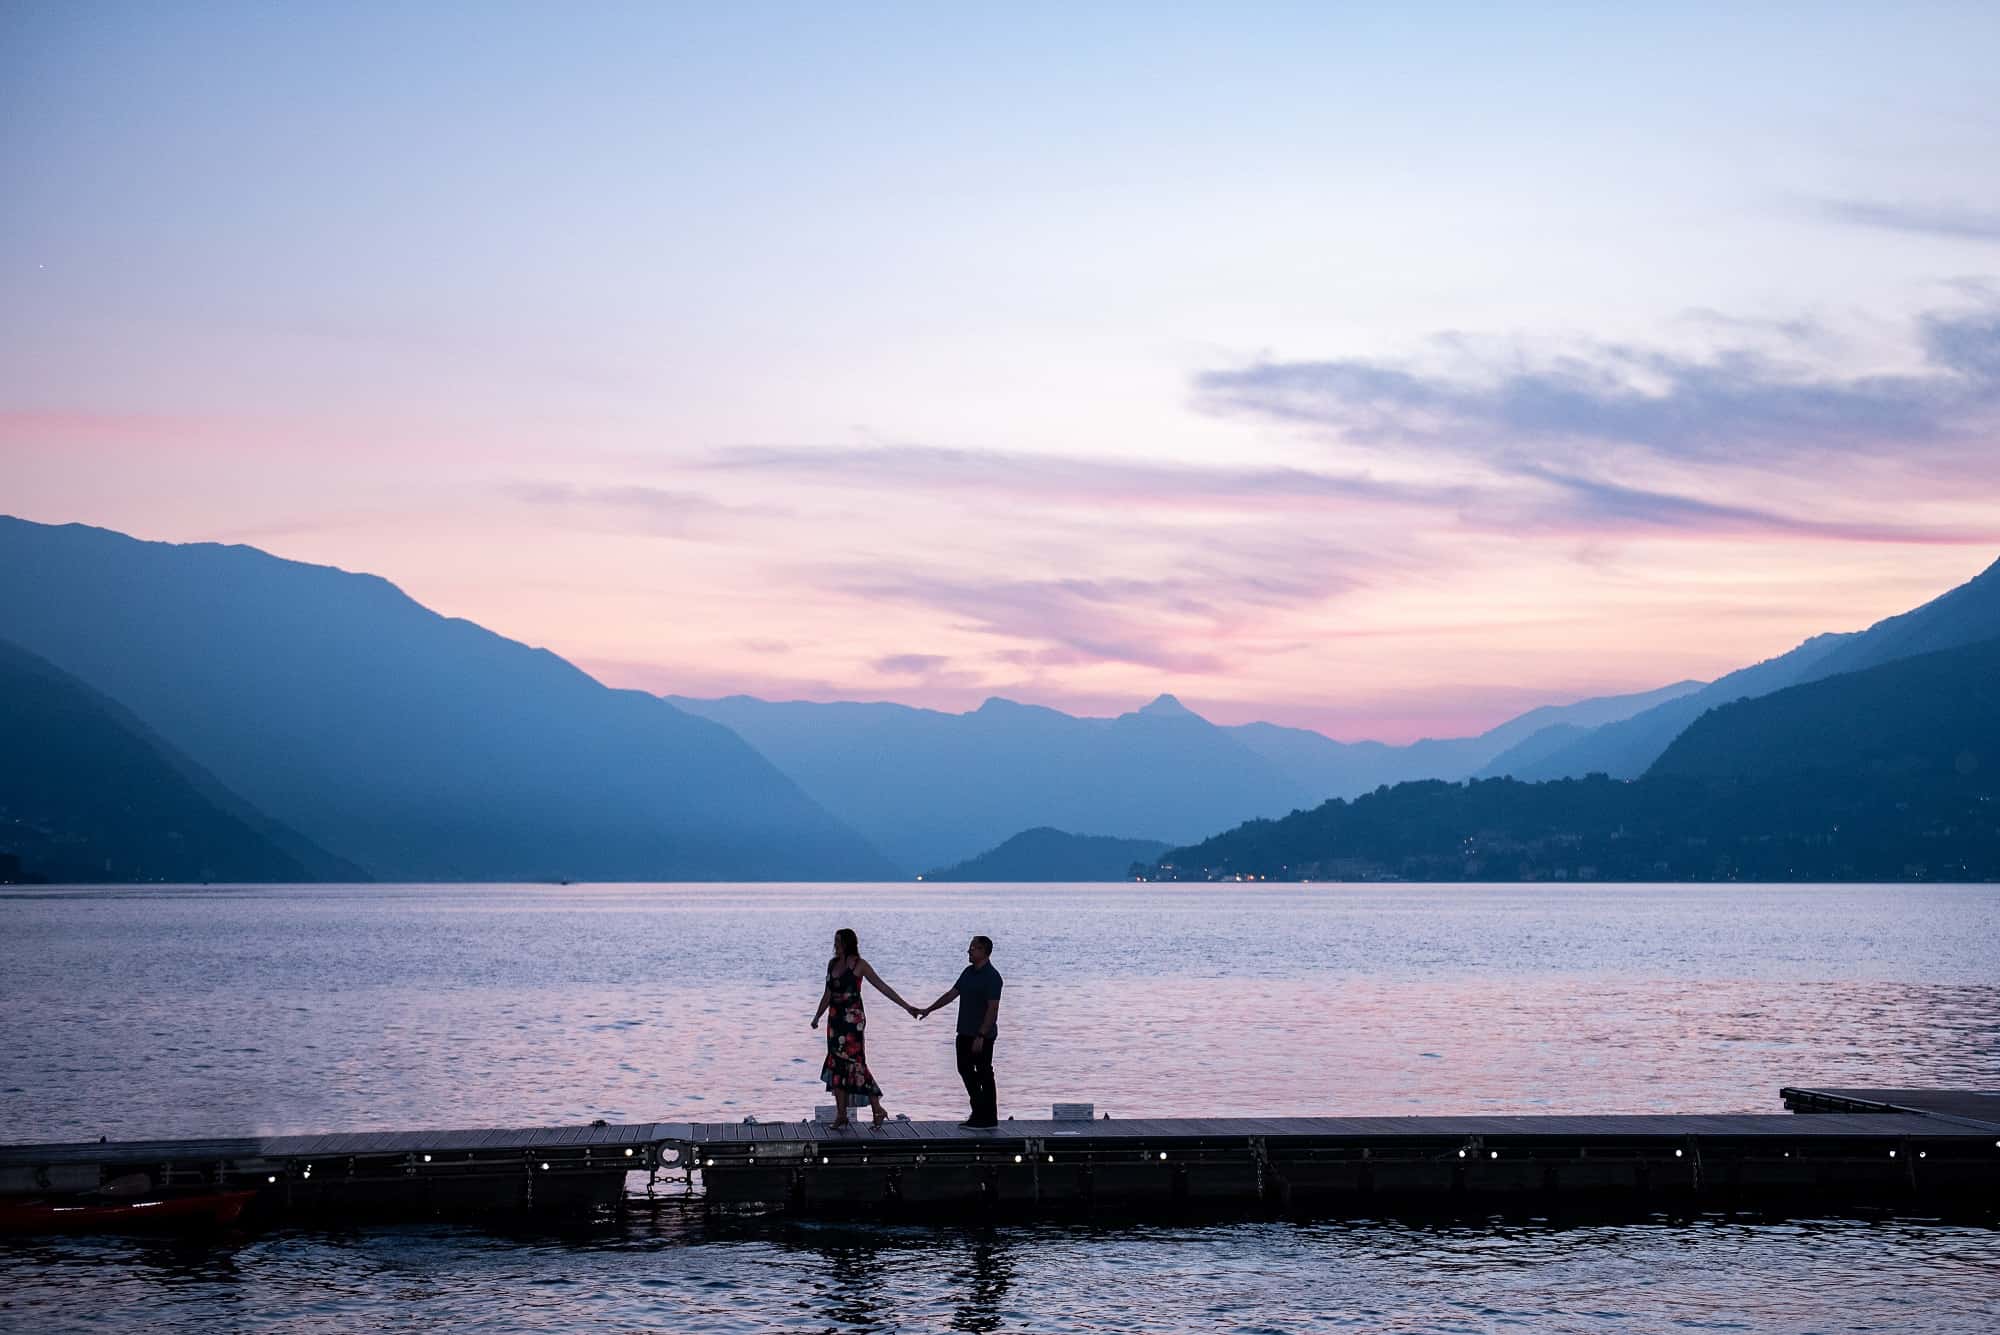 sunset with the italian mountains in the background and the couple on the lake holding hands, walking silhouetted